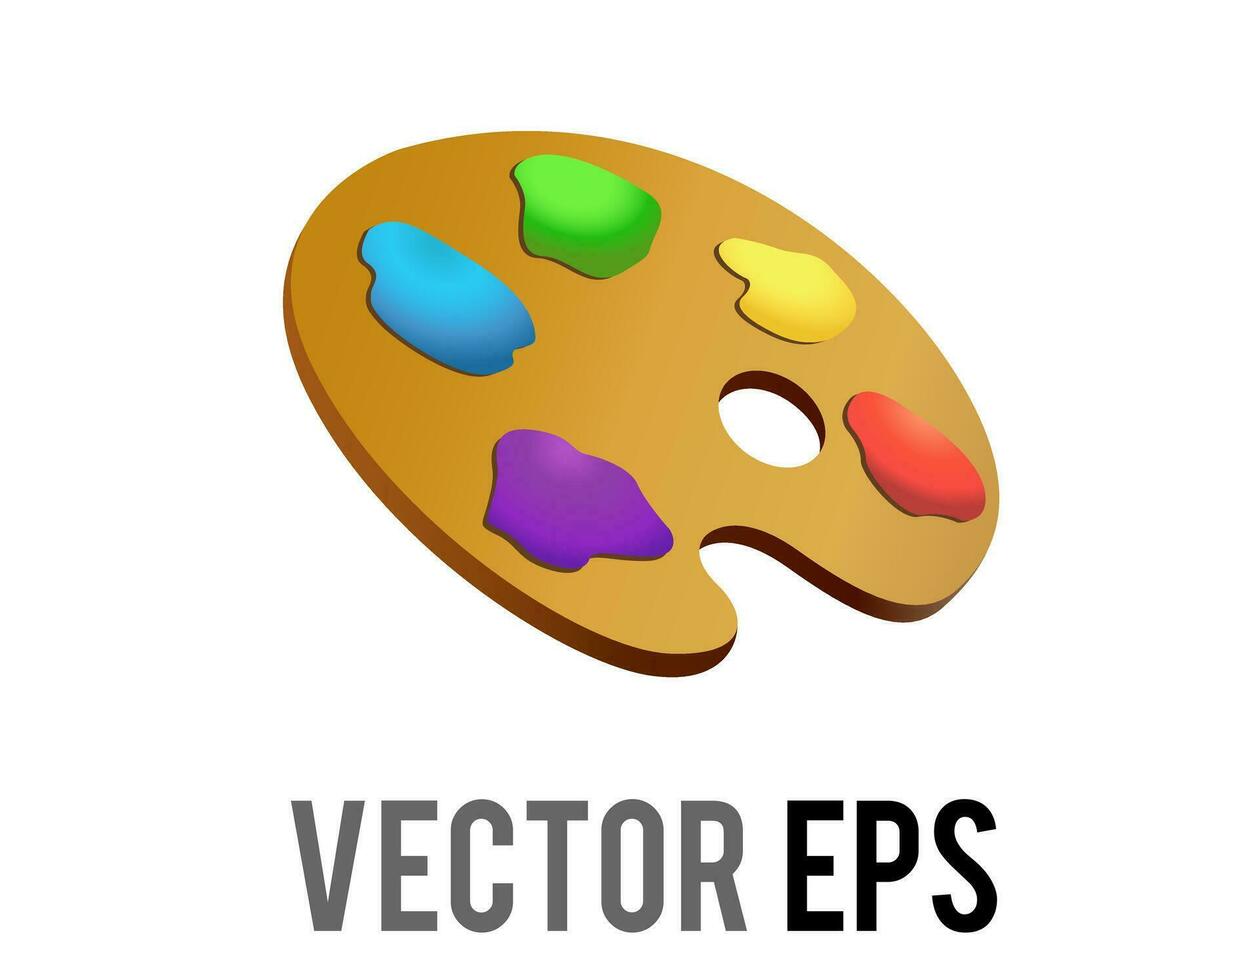 Vector artist palette icon used when painting, to store and mix paint colors